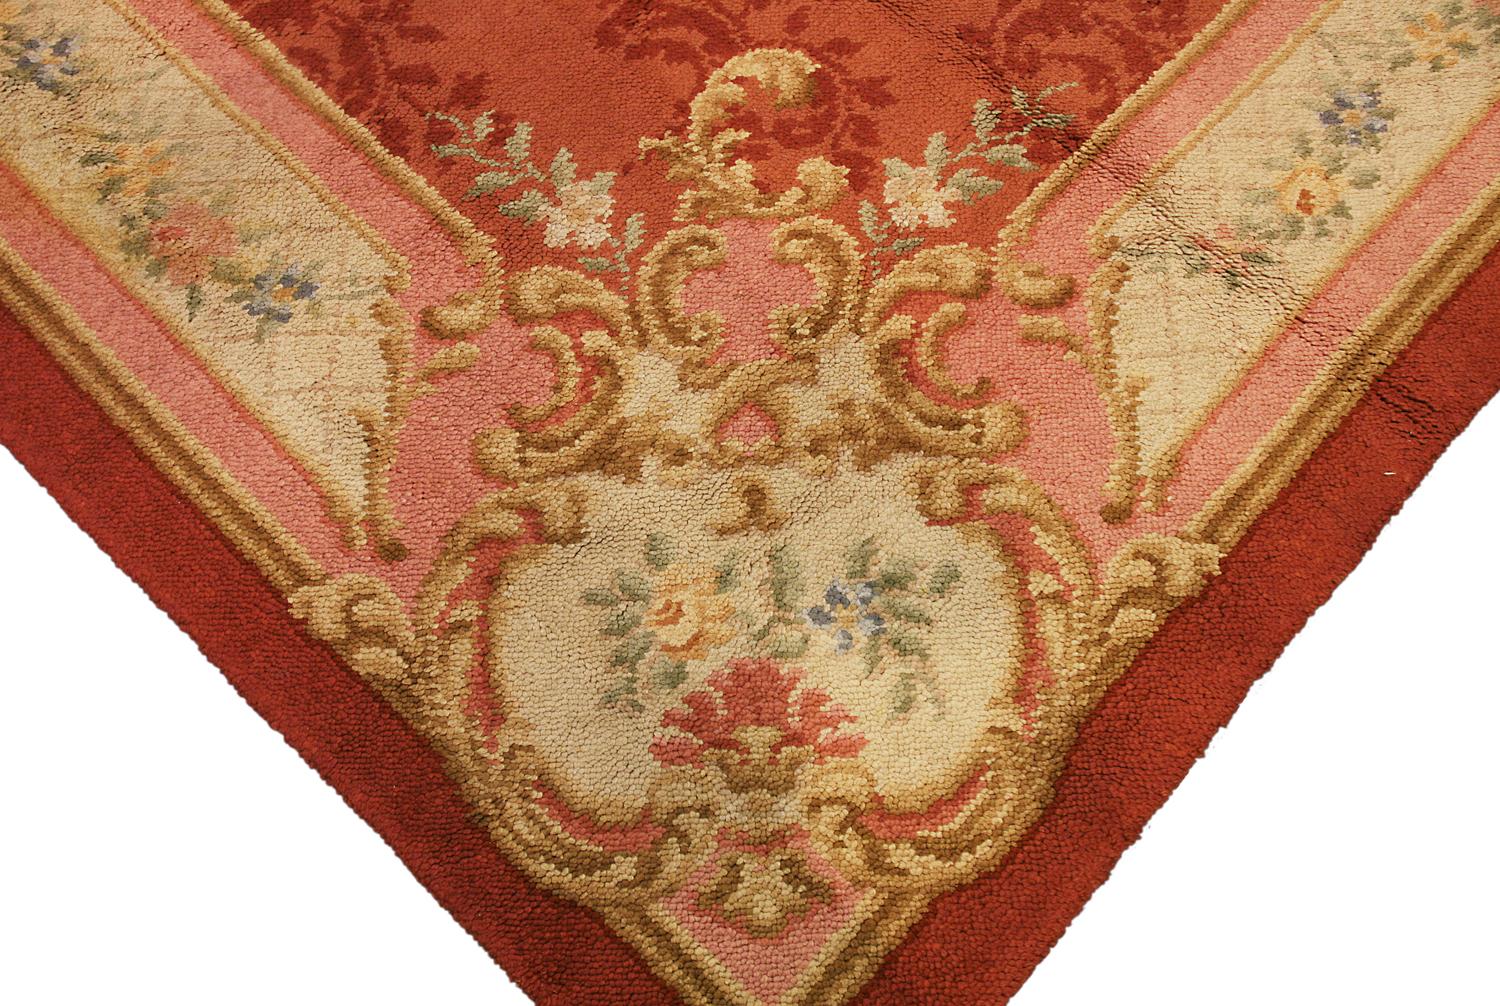 Other Signed All-Over Field Antique European 'Holland' Wool Carpet, ca. 1900 For Sale